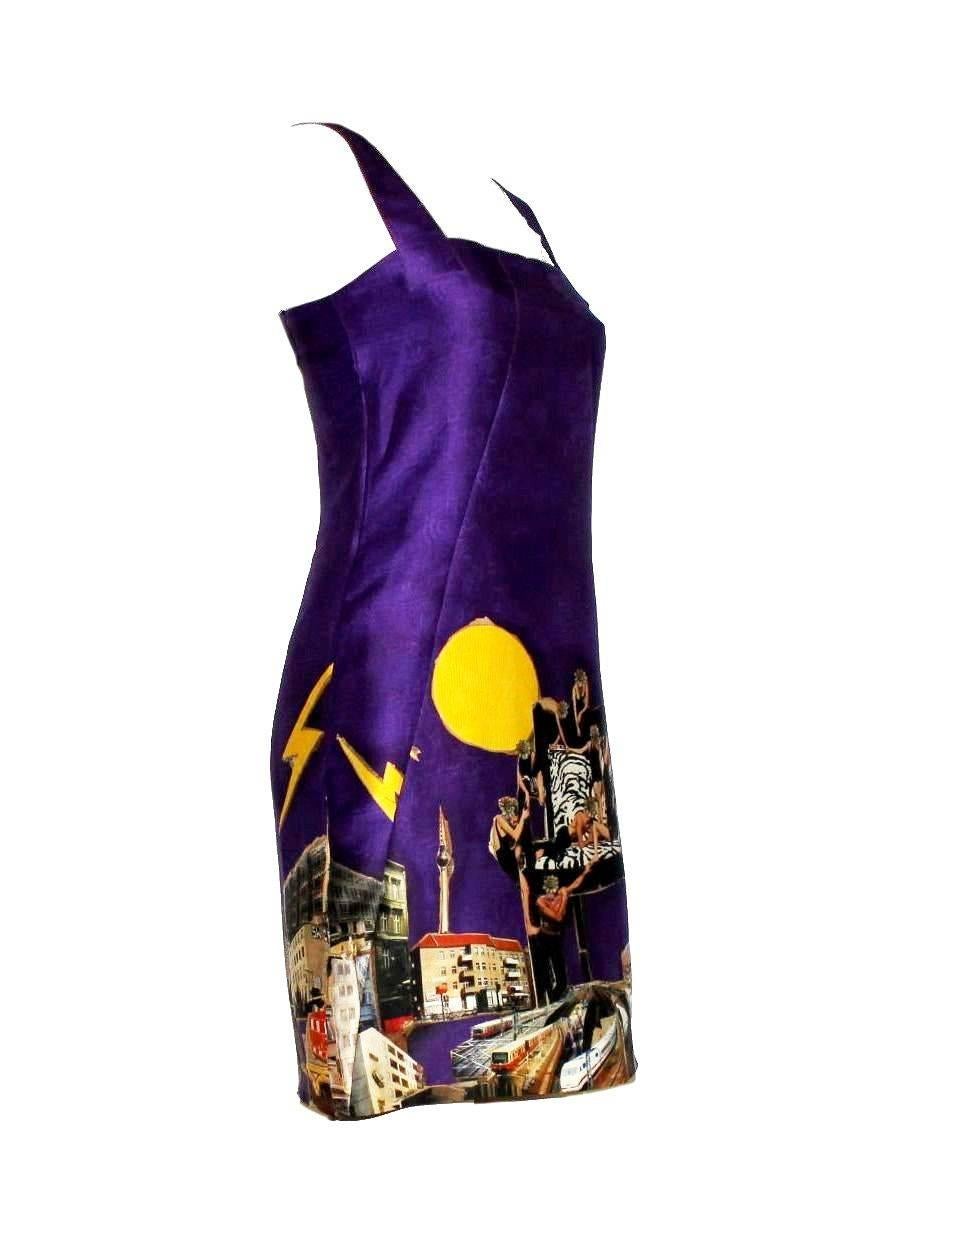 GORGEOUS VERSACE SILK DRESS

WITH AMAZING ART PRINT BY FAMOUS TIM ROELOFF

Roeloffs fused images from old ad campaigns with his trademark scenes of Berlin. The results range from people waiting for the tram dressed in Versace outfits from the 1980s,